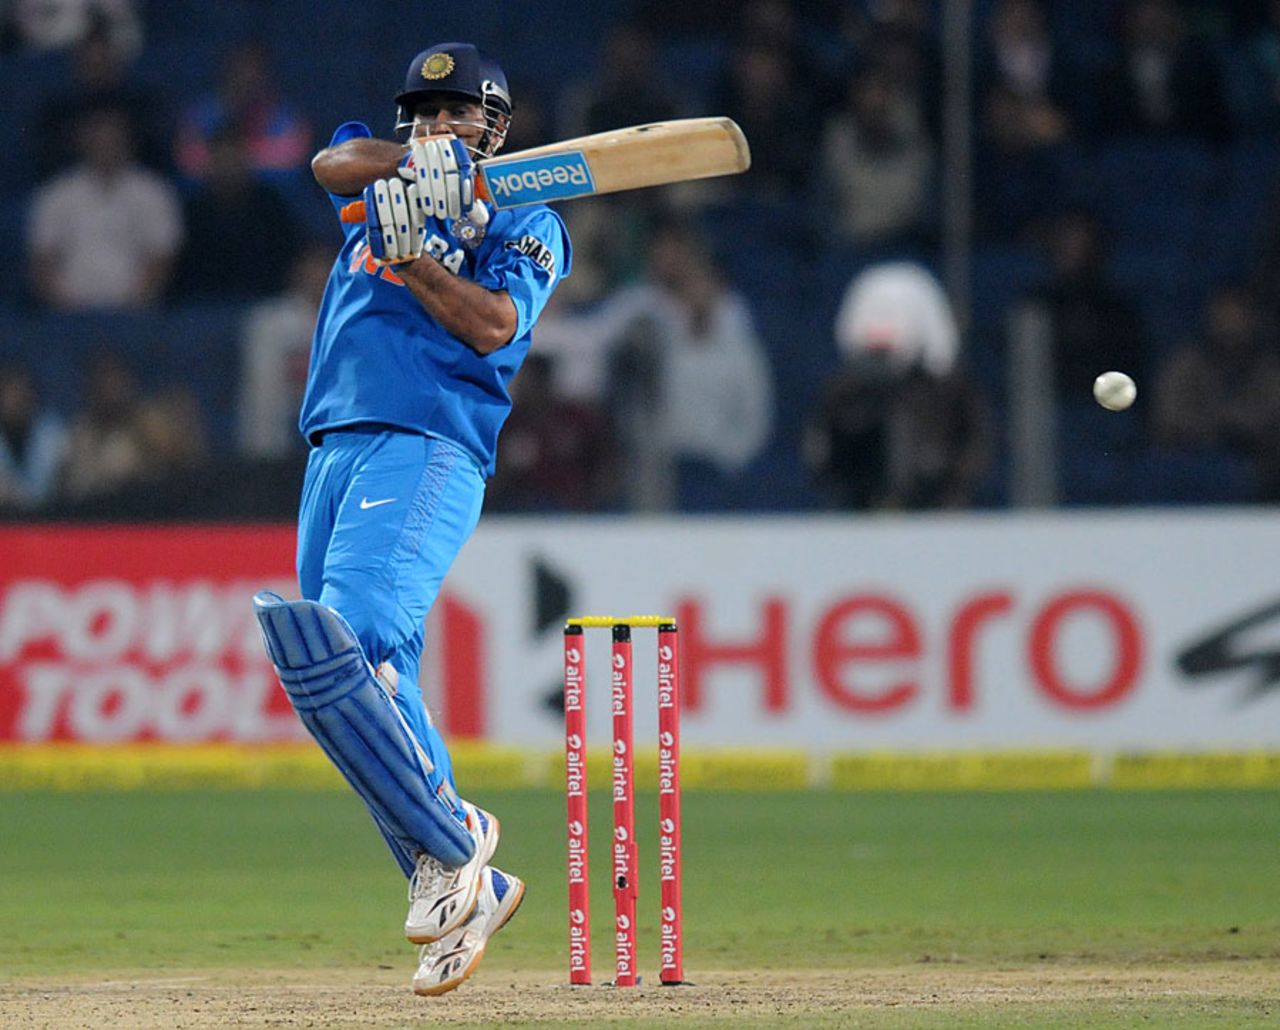 MS Dhoni guided India across the line, India v England, 1st T20, Pune, December 20, 2012